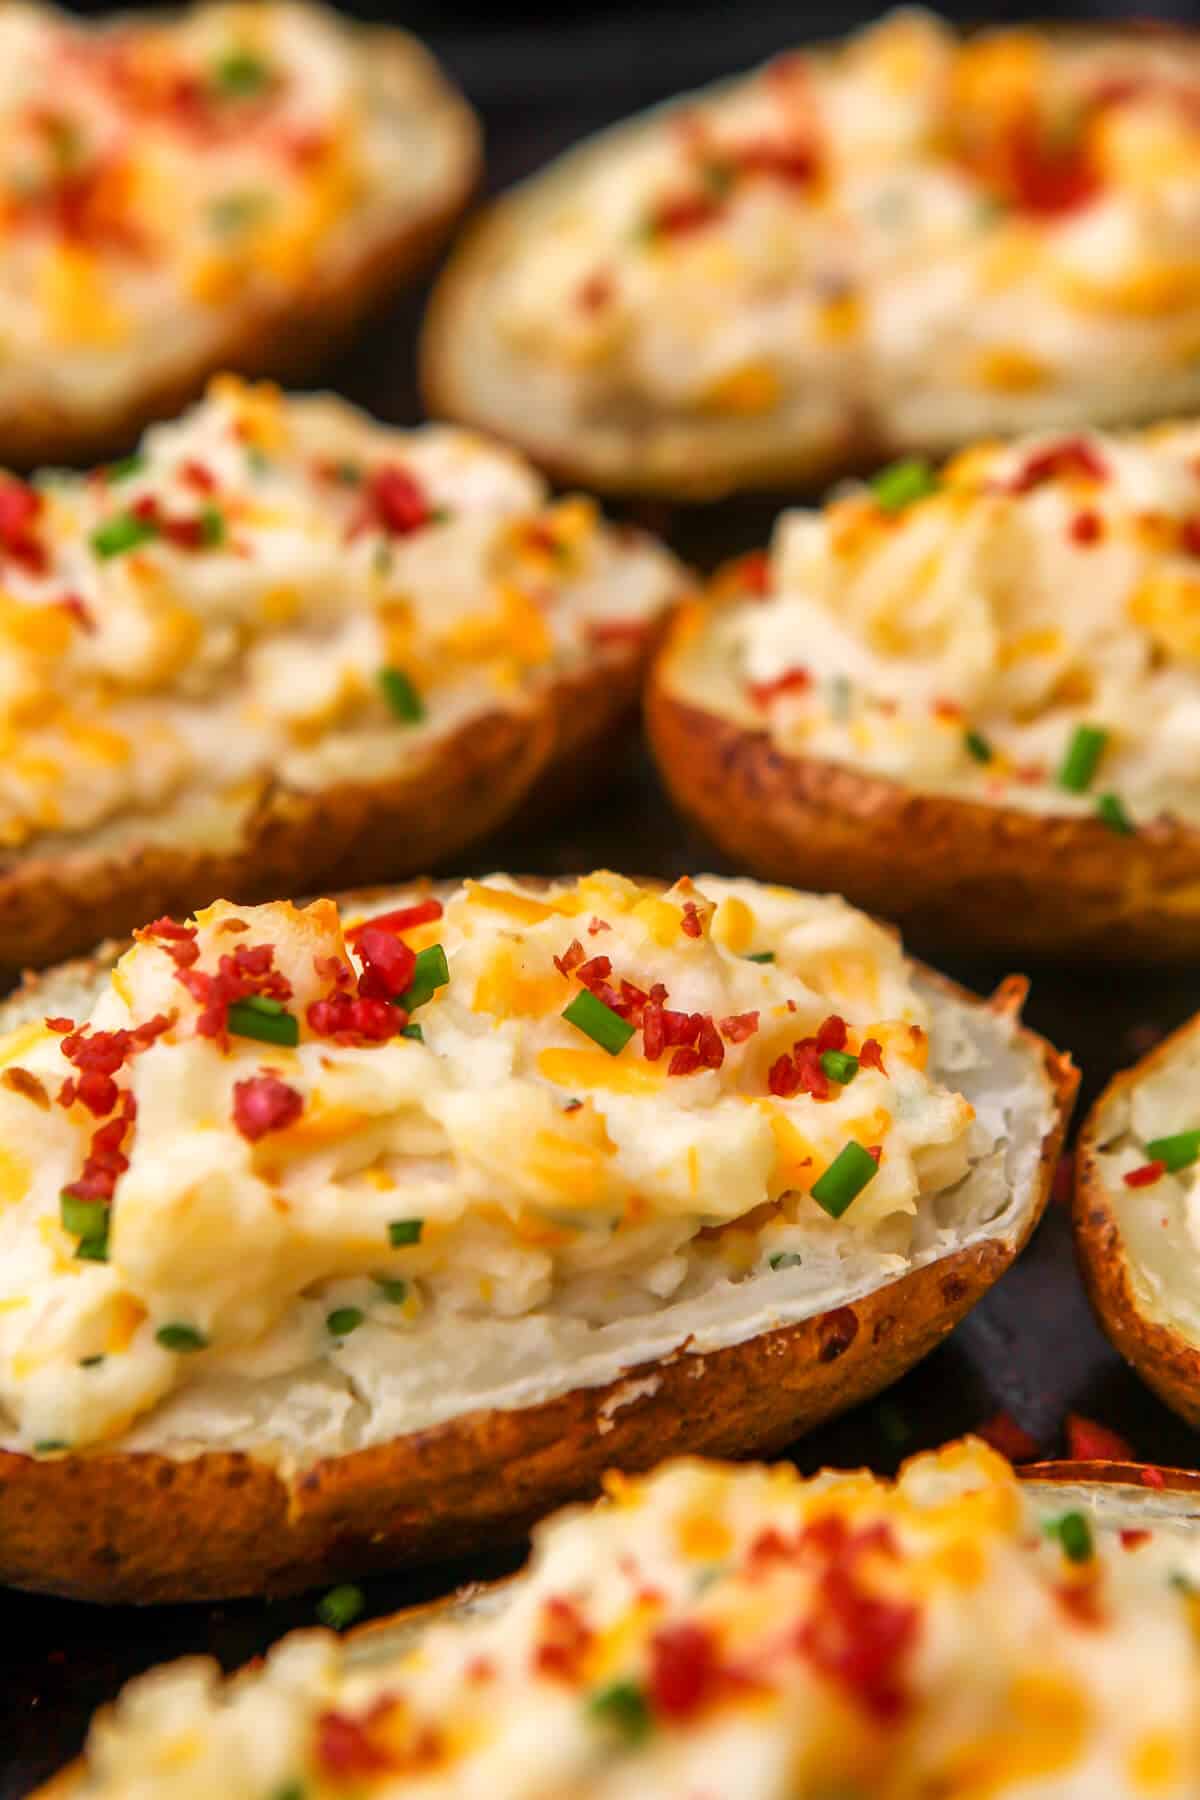 Vegan twice baked potatoes with bacon bit and chives on top.